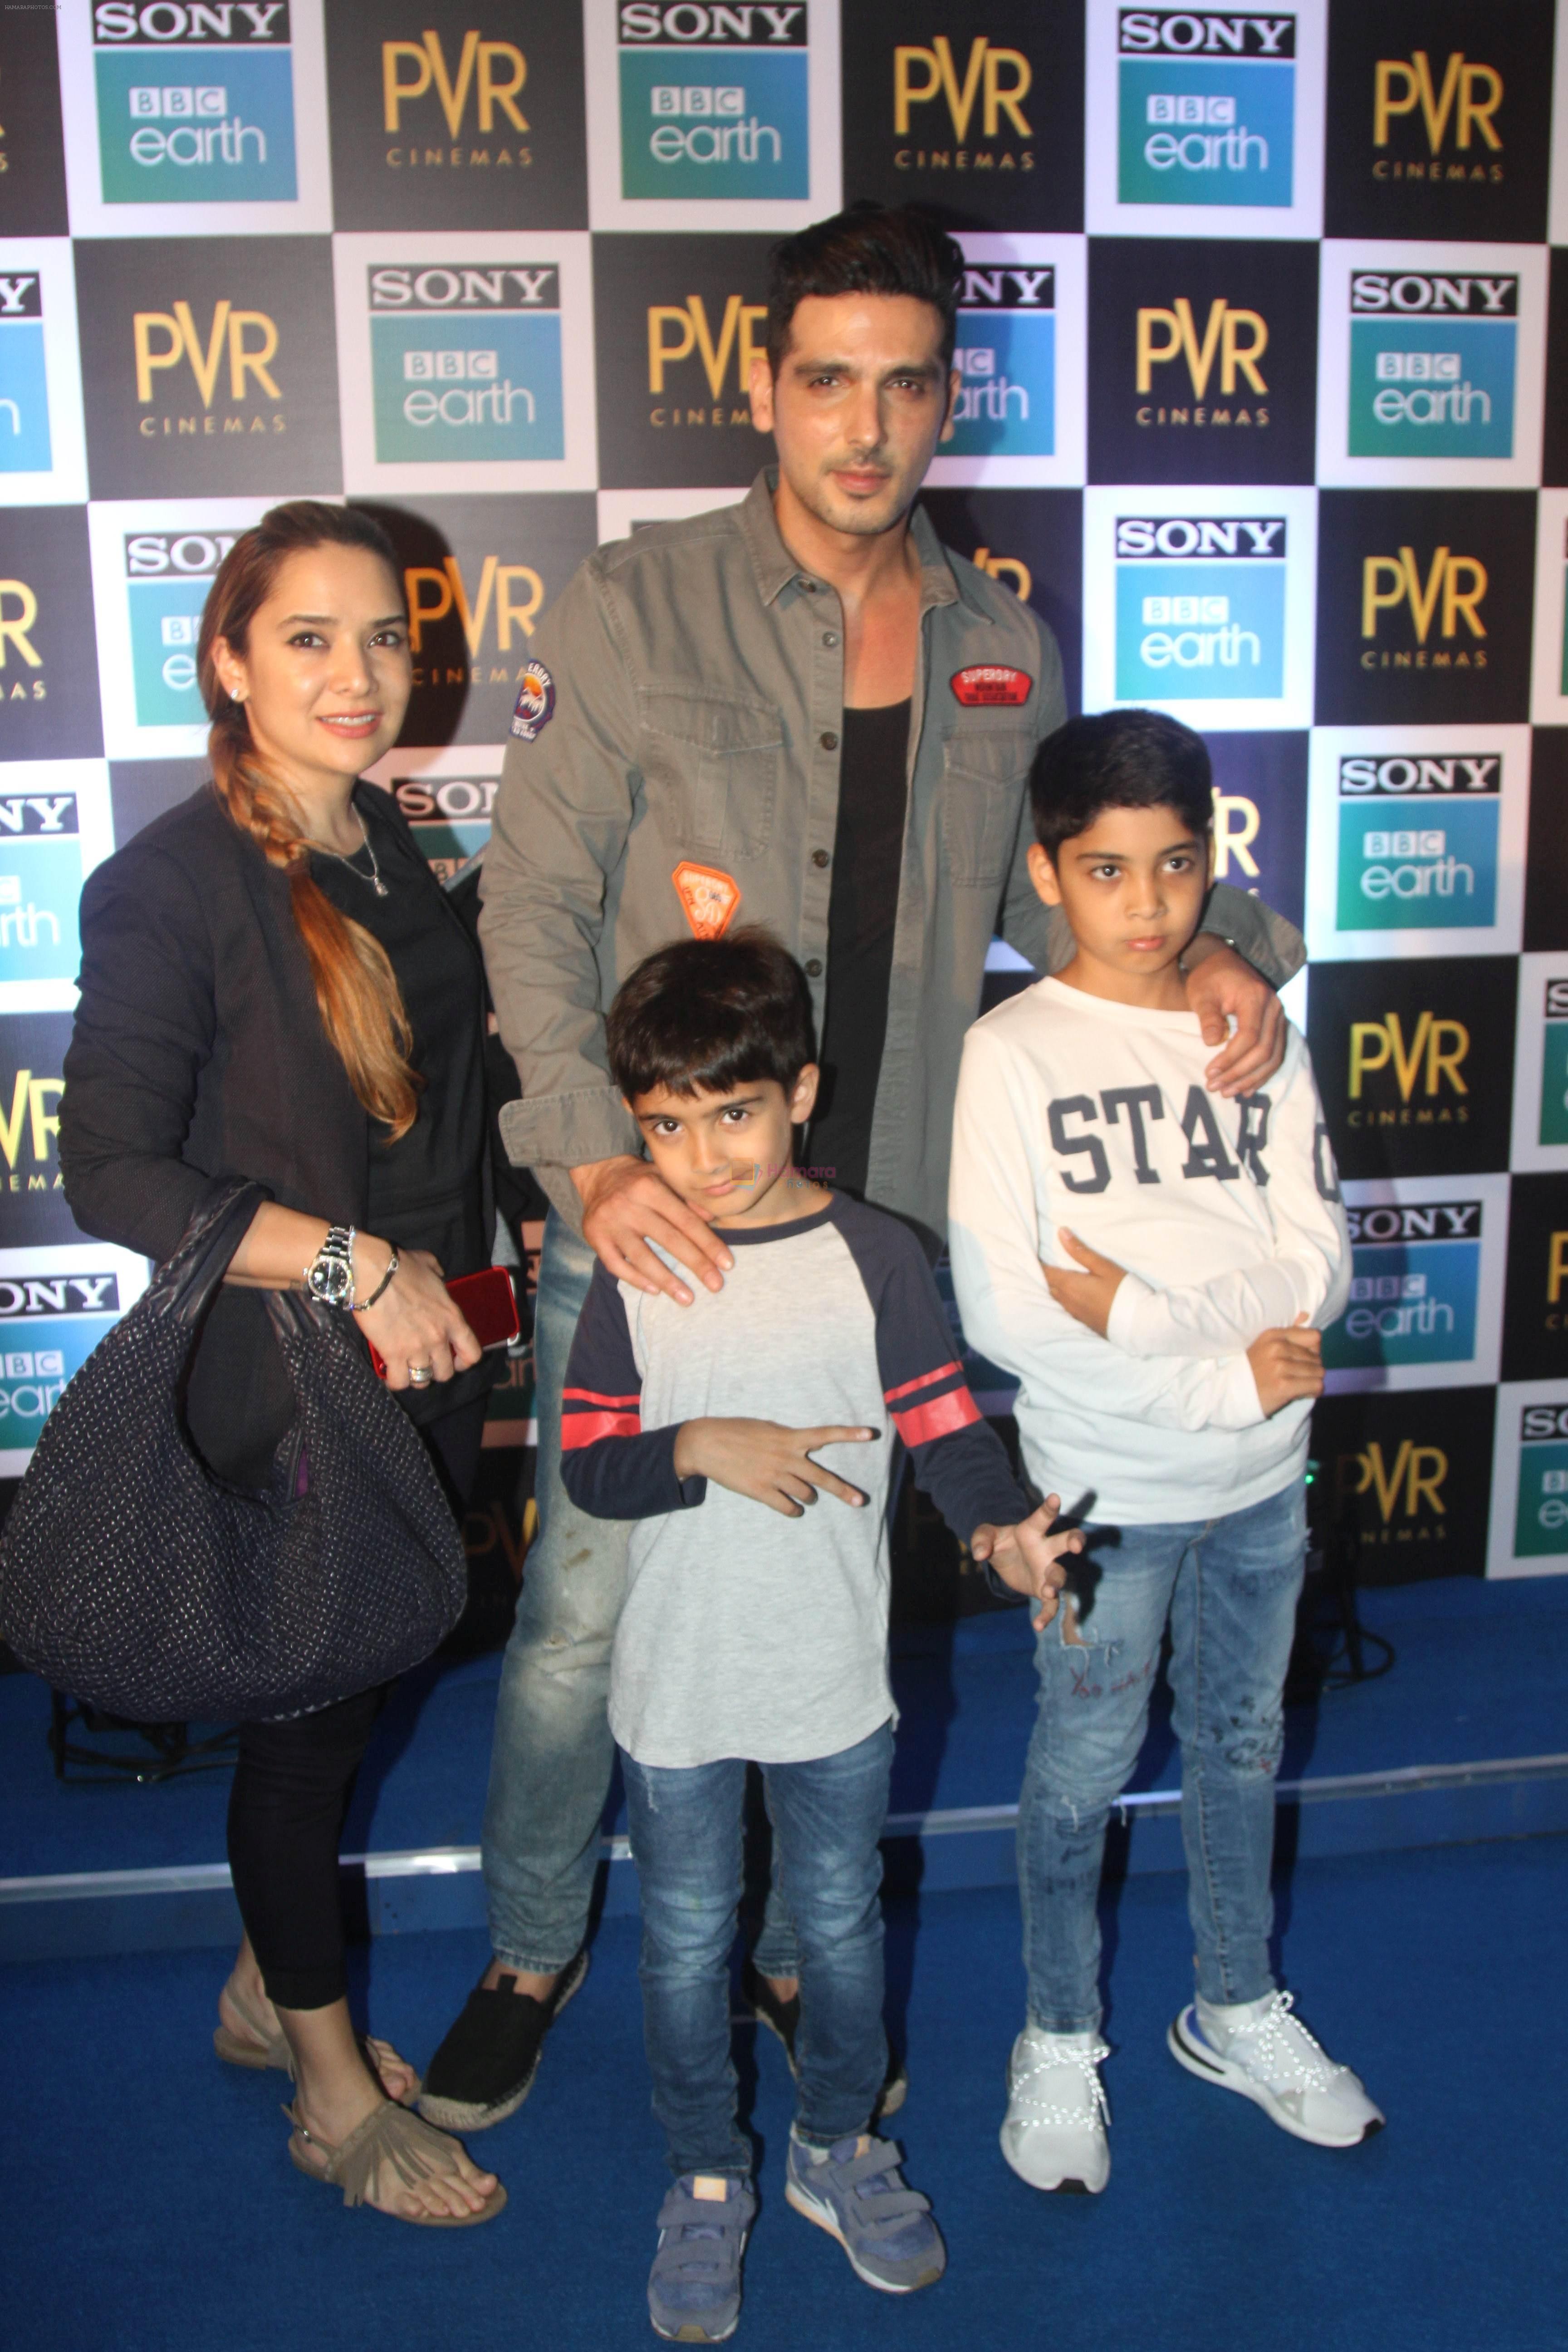 Zayed Khan at the Screening of Sony BBC Earth's film Blue Planet 2 at pvr icon in andheri on 15th May 2018